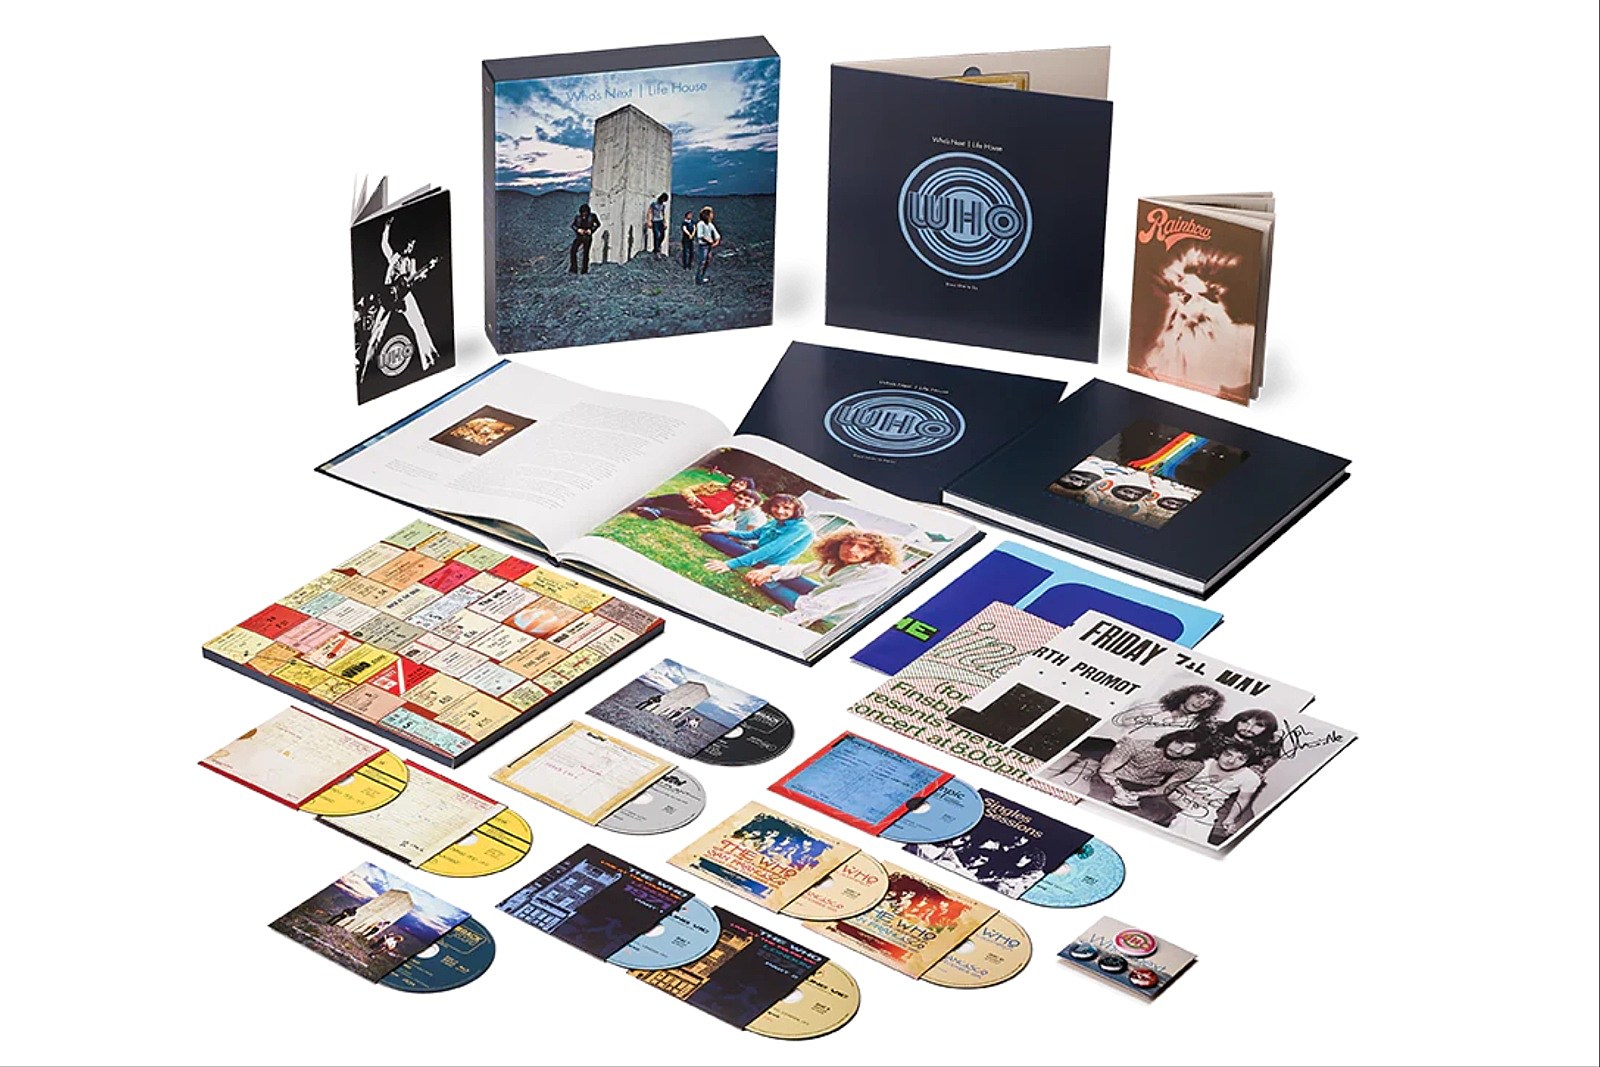 The Who Announces ‘Who’s Next/Life House’ Deluxe Box Set